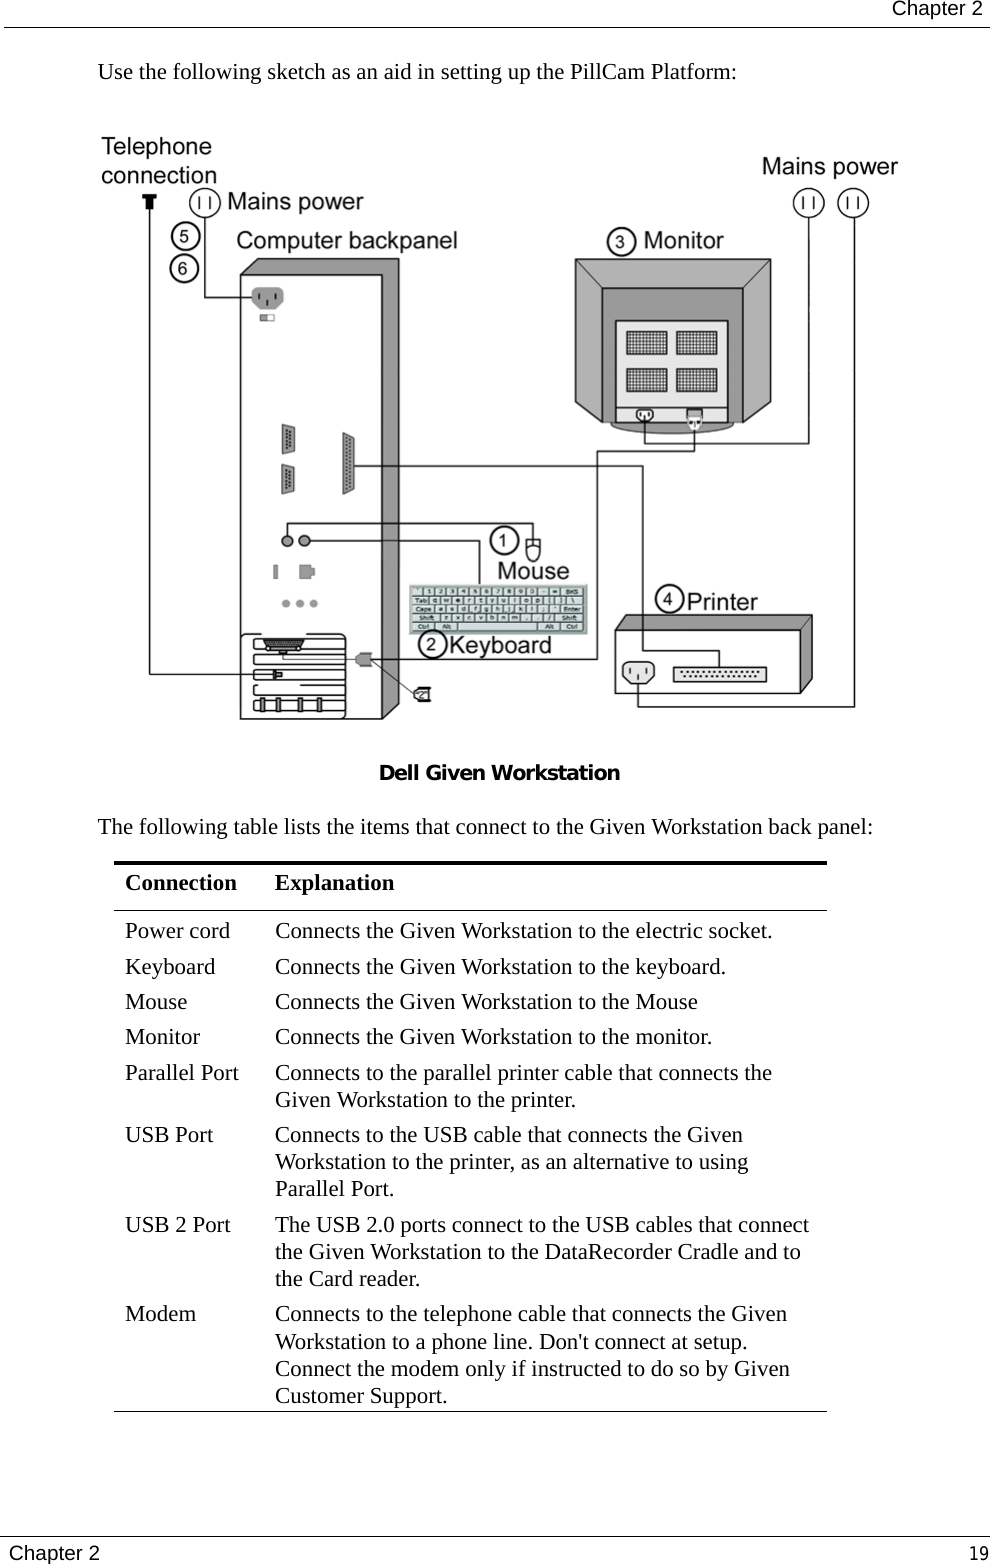 Chapter 2Chapter 2 19Use the following sketch as an aid in setting up the PillCam Platform:Dell Given WorkstationThe following table lists the items that connect to the Given Workstation back panel:Connection ExplanationPower cord  Connects the Given Workstation to the electric socket.Keyboard Connects the Given Workstation to the keyboard.Mouse Connects the Given Workstation to the MouseMonitor Connects the Given Workstation to the monitor.Parallel Port  Connects to the parallel printer cable that connects the Given Workstation to the printer. USB Port  Connects to the USB cable that connects the Given Workstation to the printer, as an alternative to using Parallel Port.USB 2 Port  The USB 2.0 ports connect to the USB cables that connect the Given Workstation to the DataRecorder Cradle and to the Card reader.Modem Connects to the telephone cable that connects the Given Workstation to a phone line. Don&apos;t connect at setup. Connect the modem only if instructed to do so by Given Customer Support.